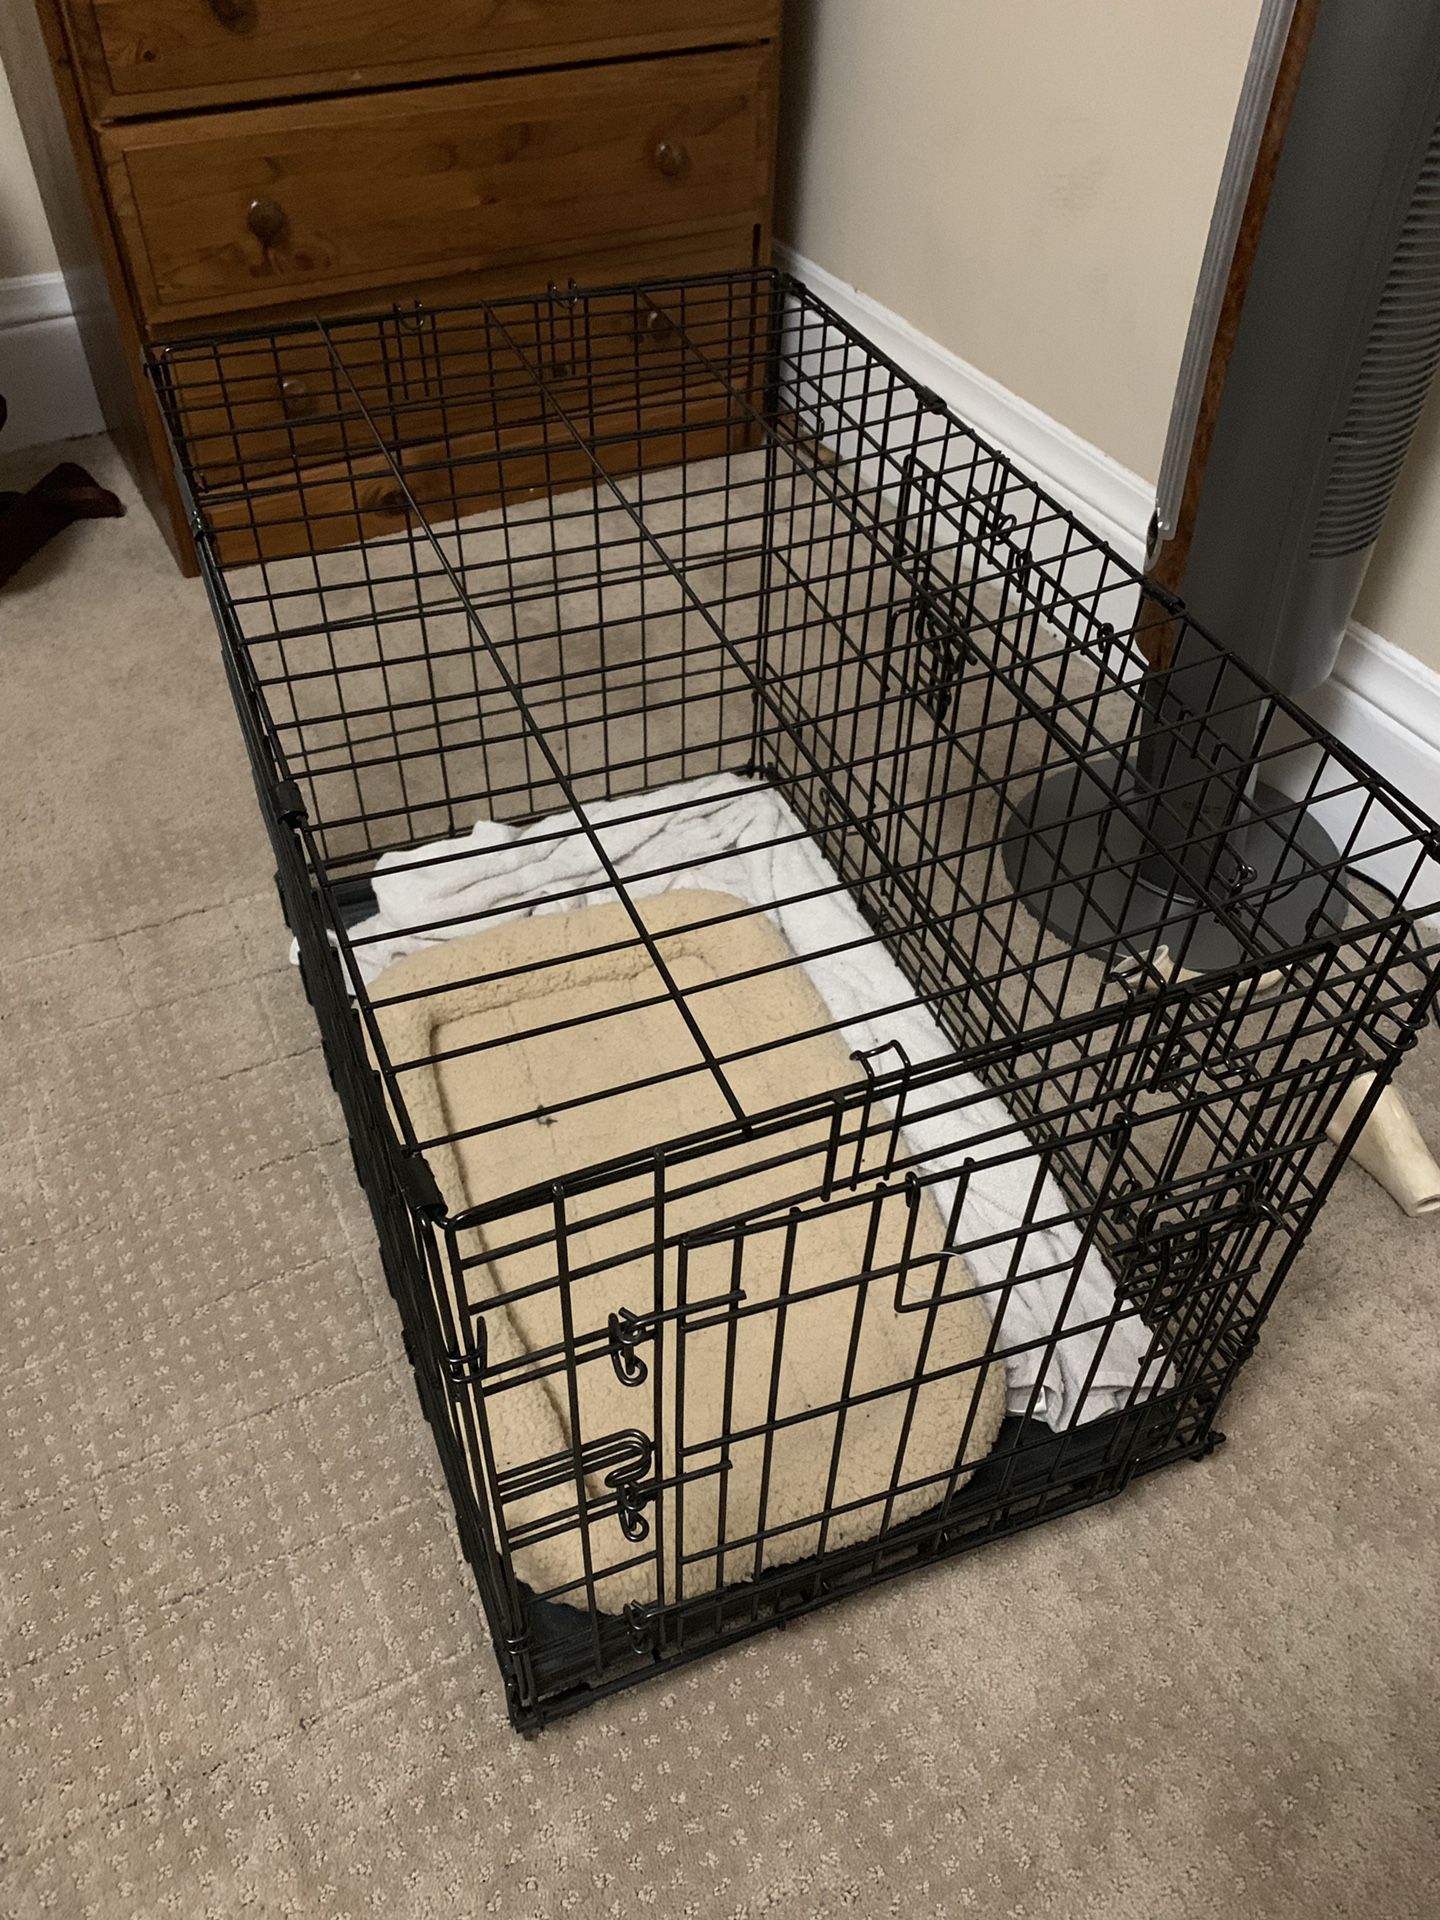 Collapsible wire dog crate - 2 x3.5x2.5